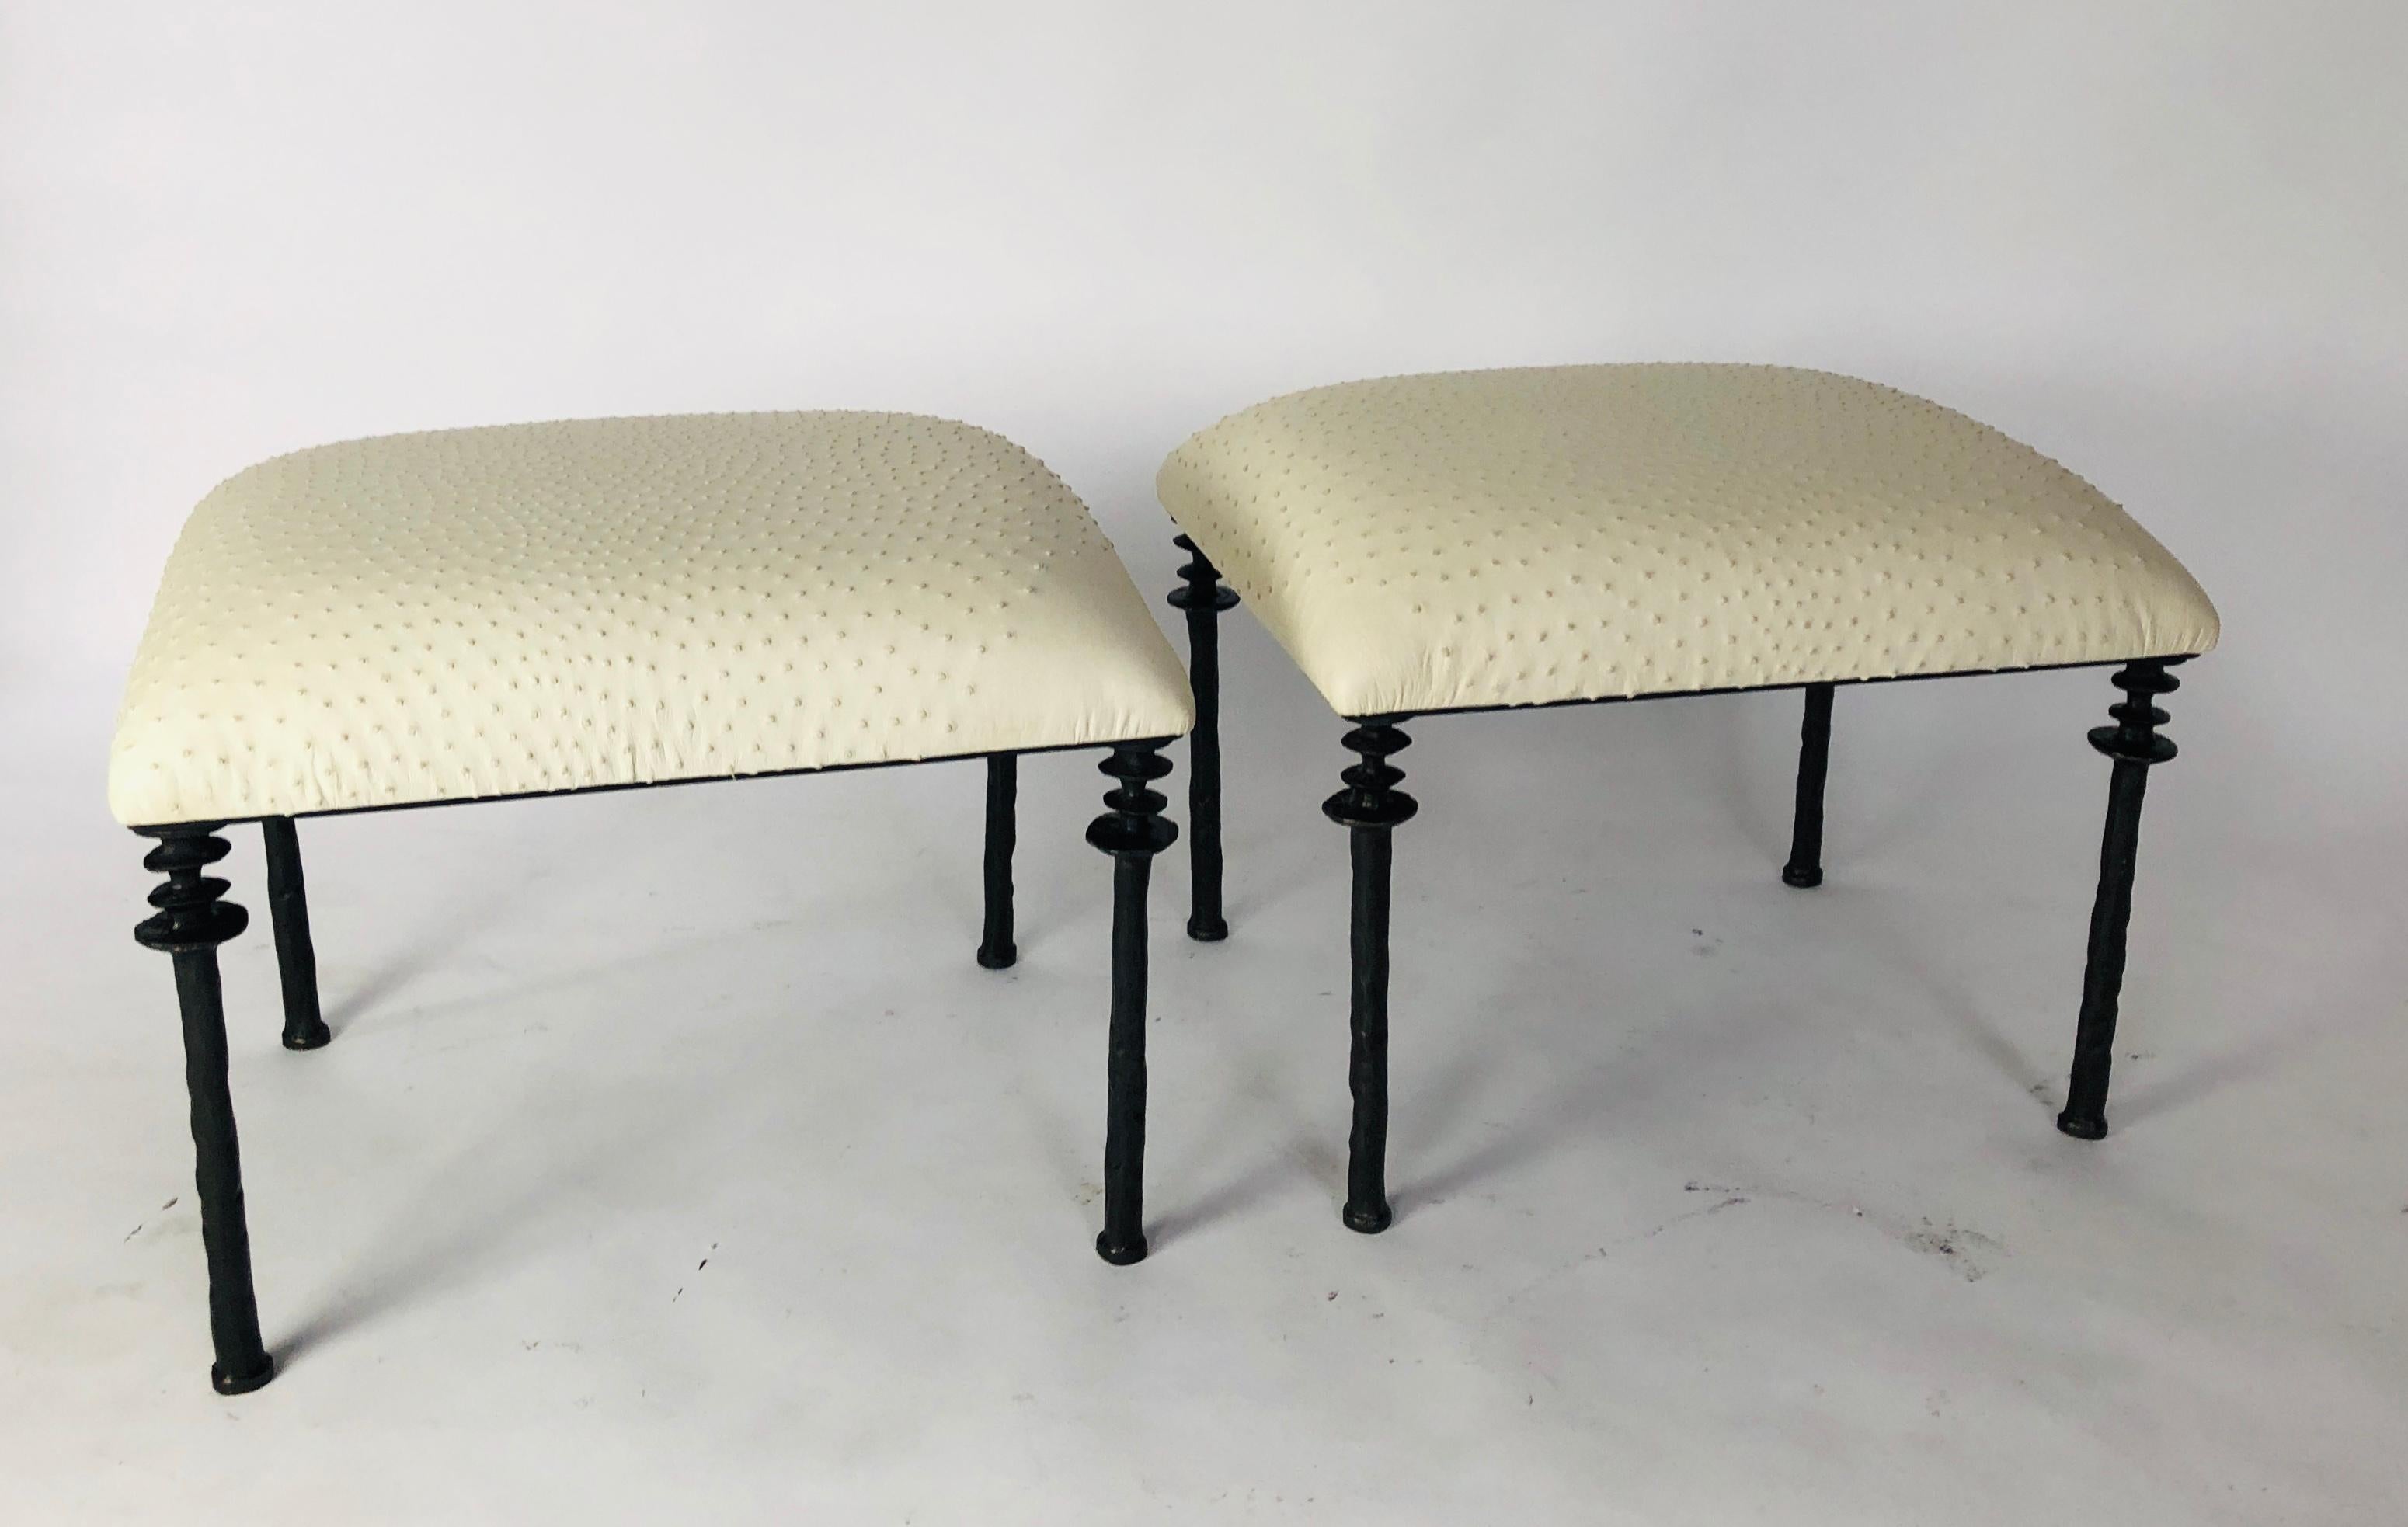 Two beautiful stools inspired by Diego Giacometti, these stools are ideal for those who are looking for unique seating. Their cast bronze legs provide a truly organic touch. The seat cushion has been upholstered in a tan ostrich leather hide.